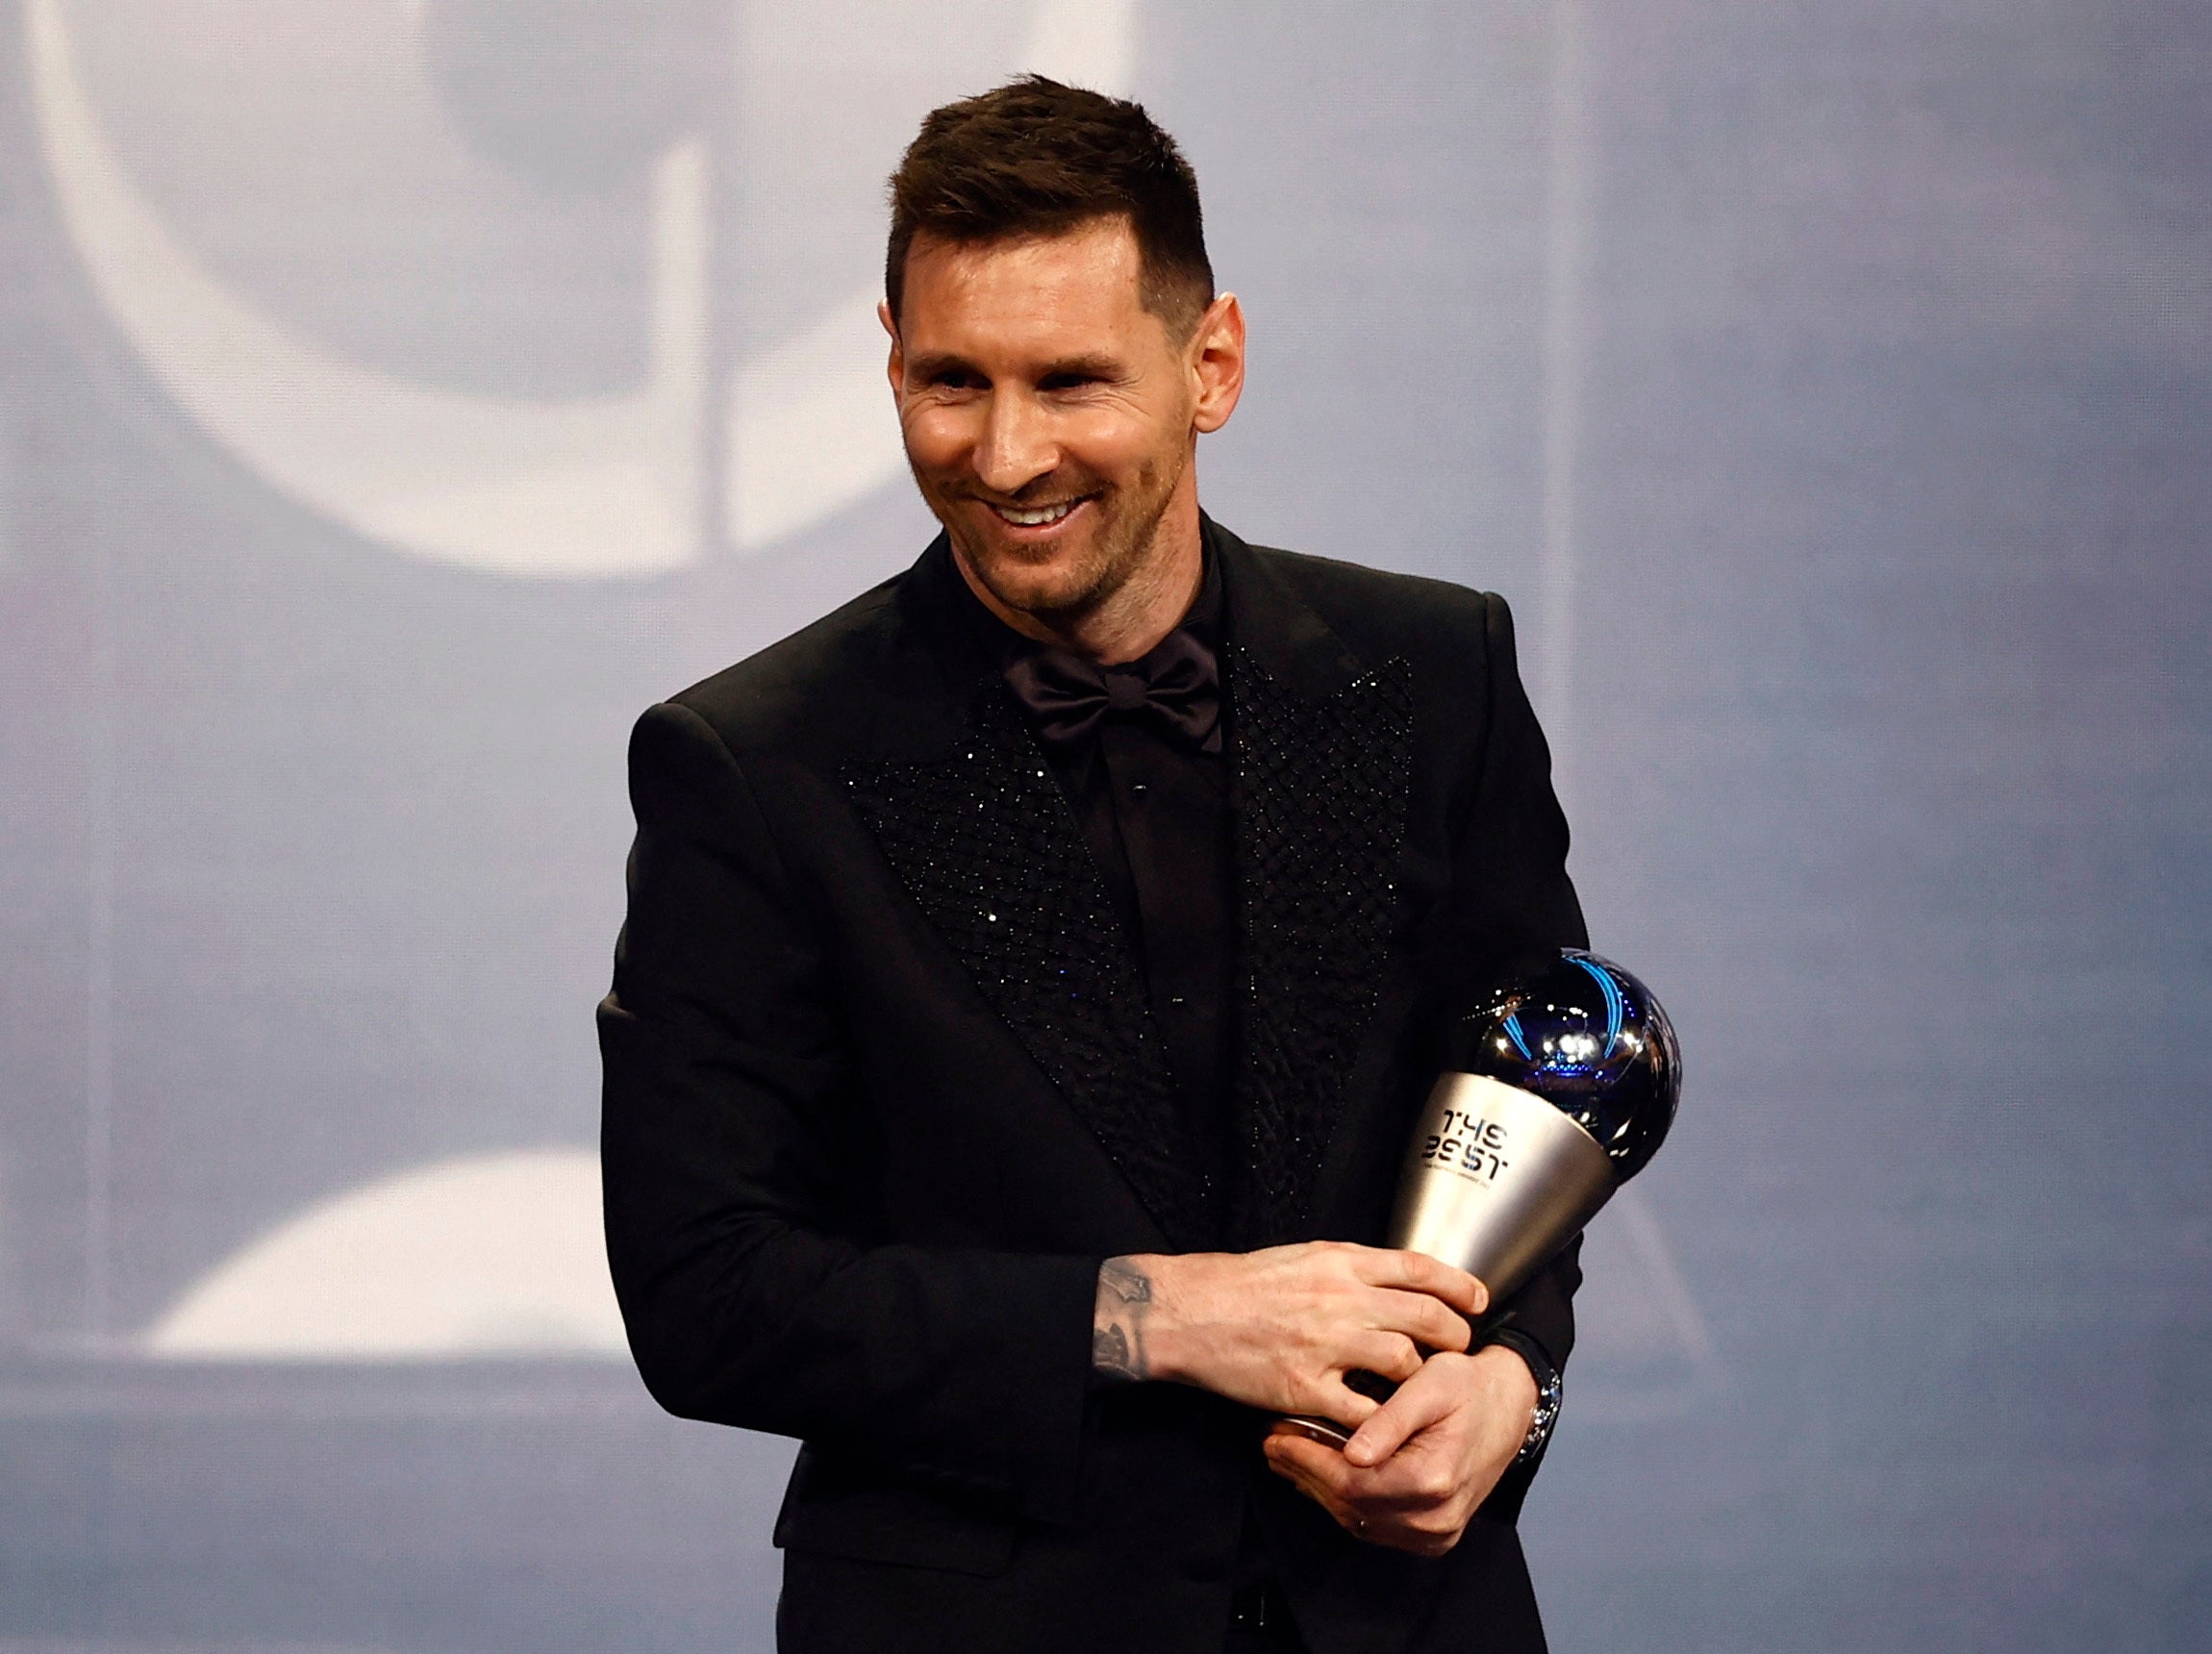 The Best 2021: FIFA reveal nominees for The Best Awards 2021